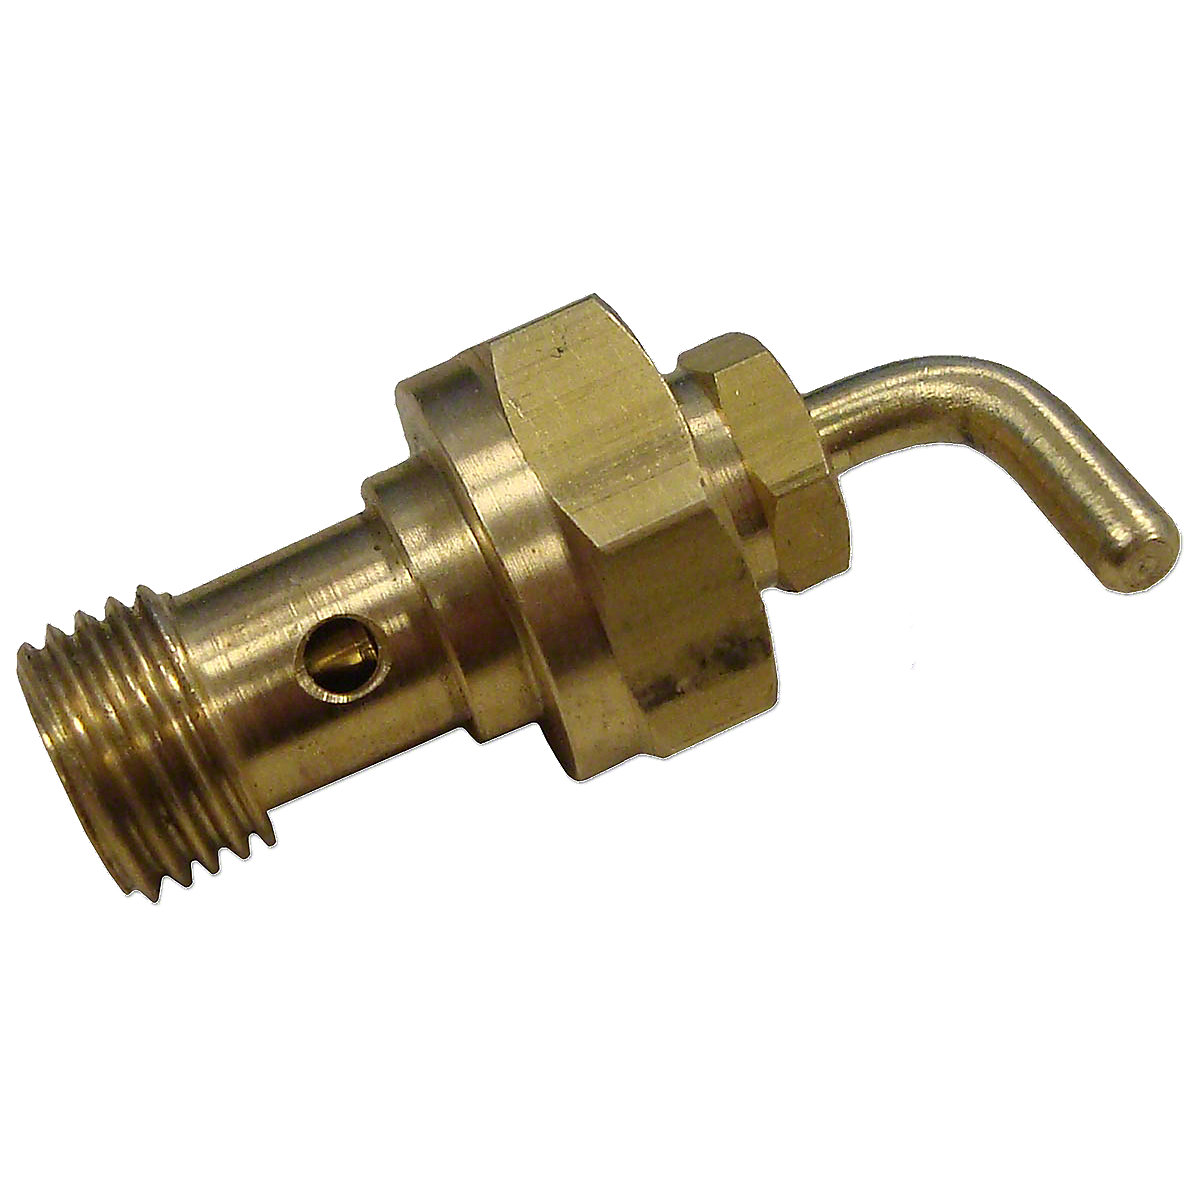 Main Load Adjusting Needle Assembly For Massey Ferguson And Massey Harris Tractors.